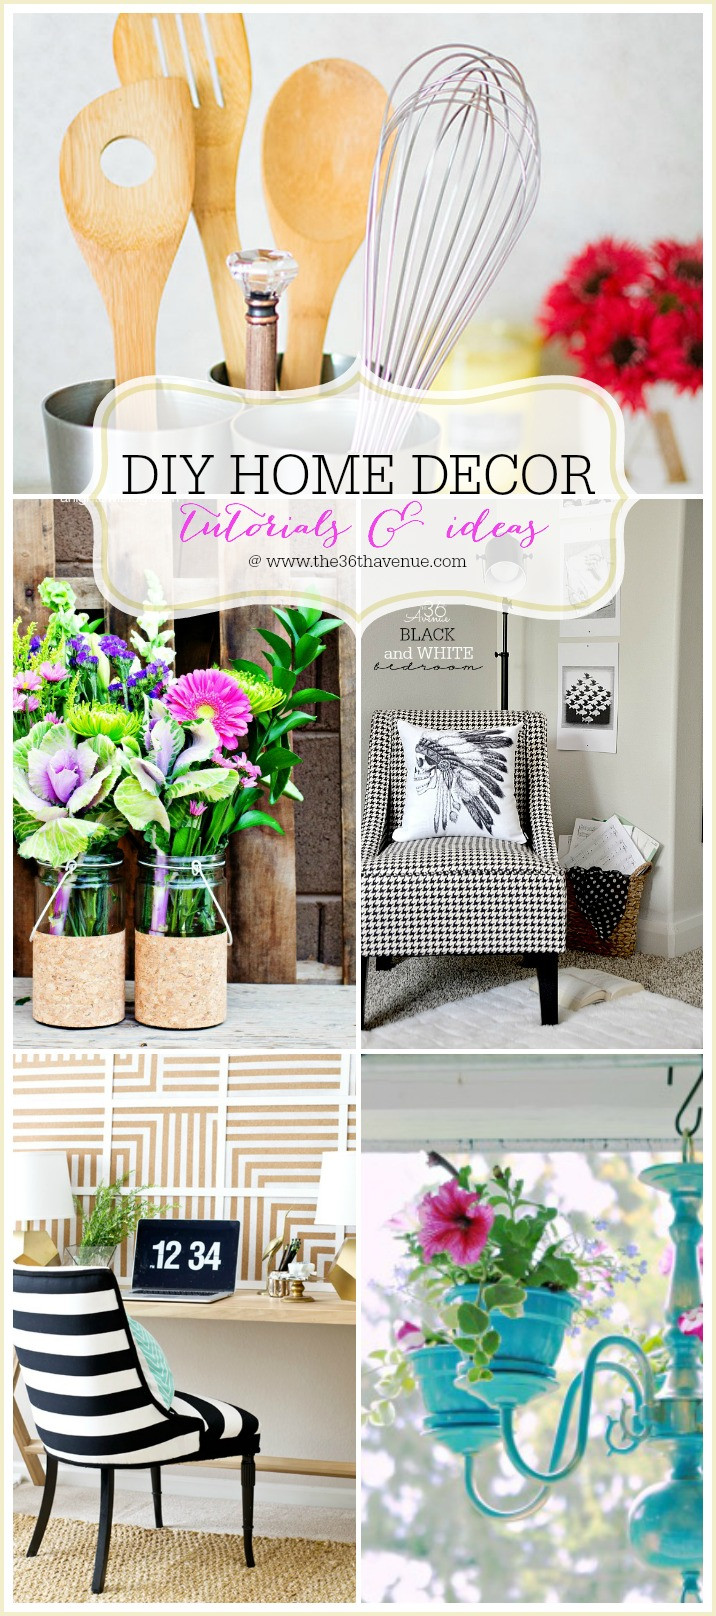 Home Decoration Ideas DIY
 Home Decor DIY Projects The 36th AVENUE